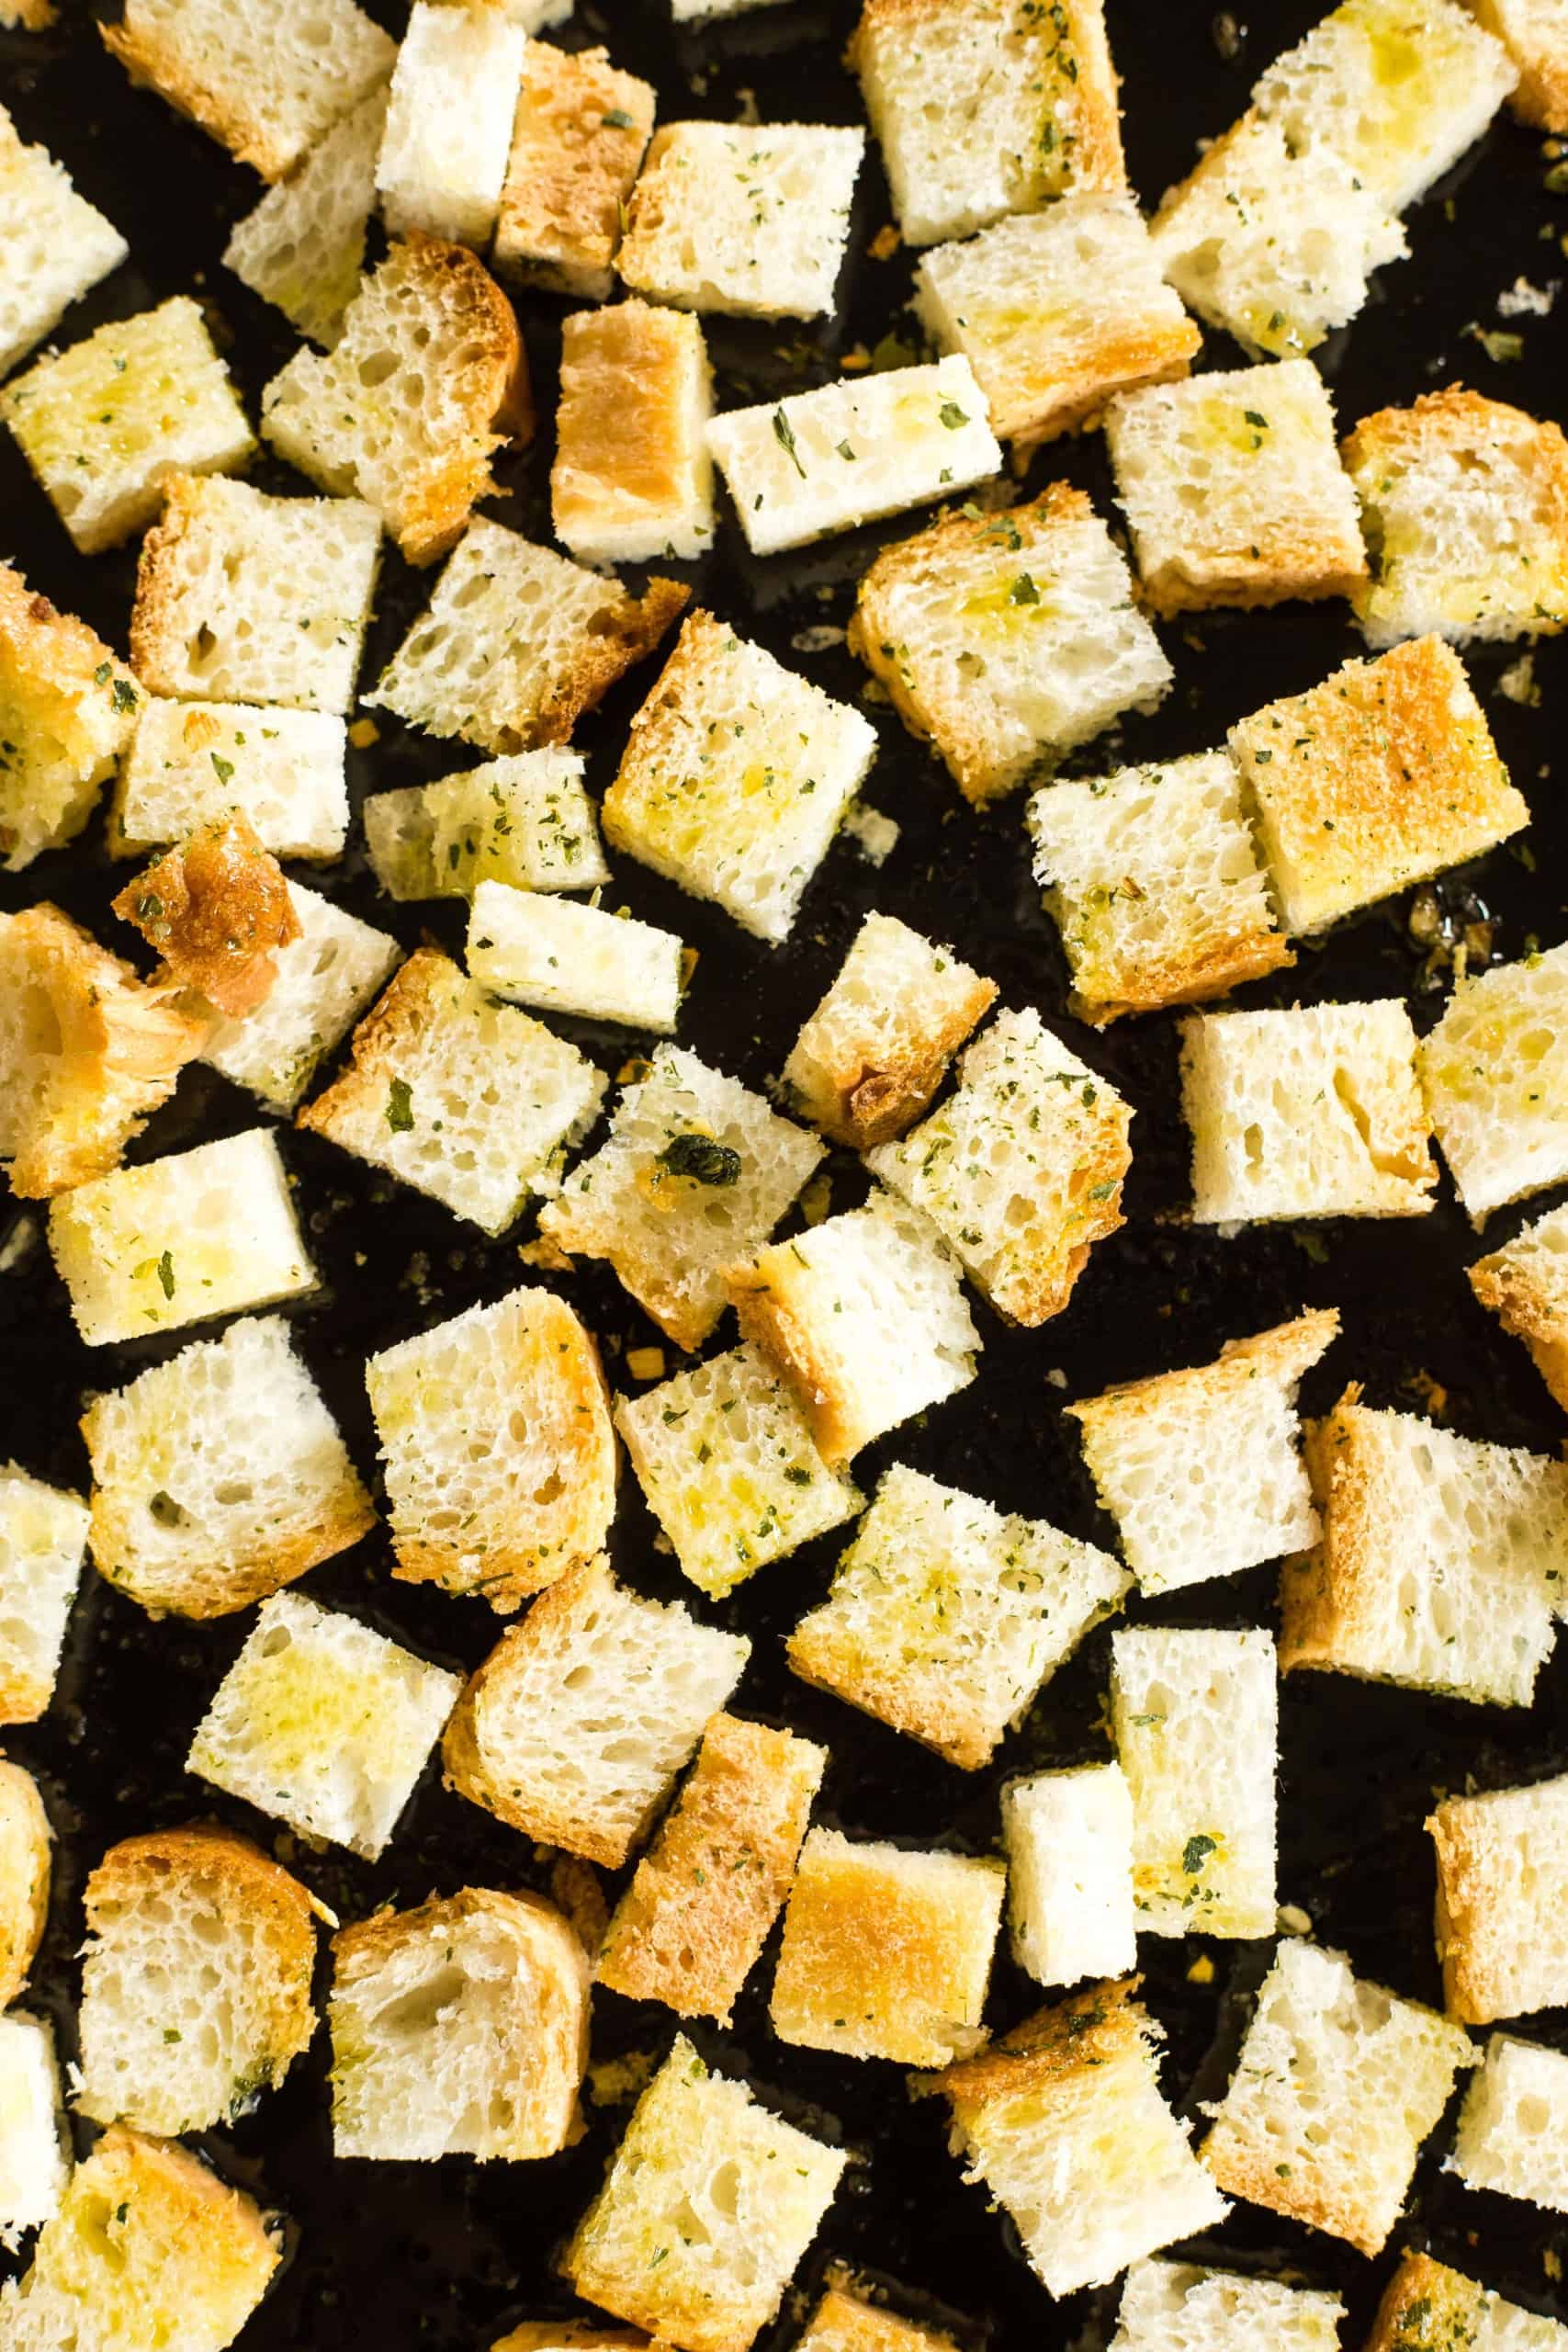 Gluten-free croutons spread out on a baking sheet